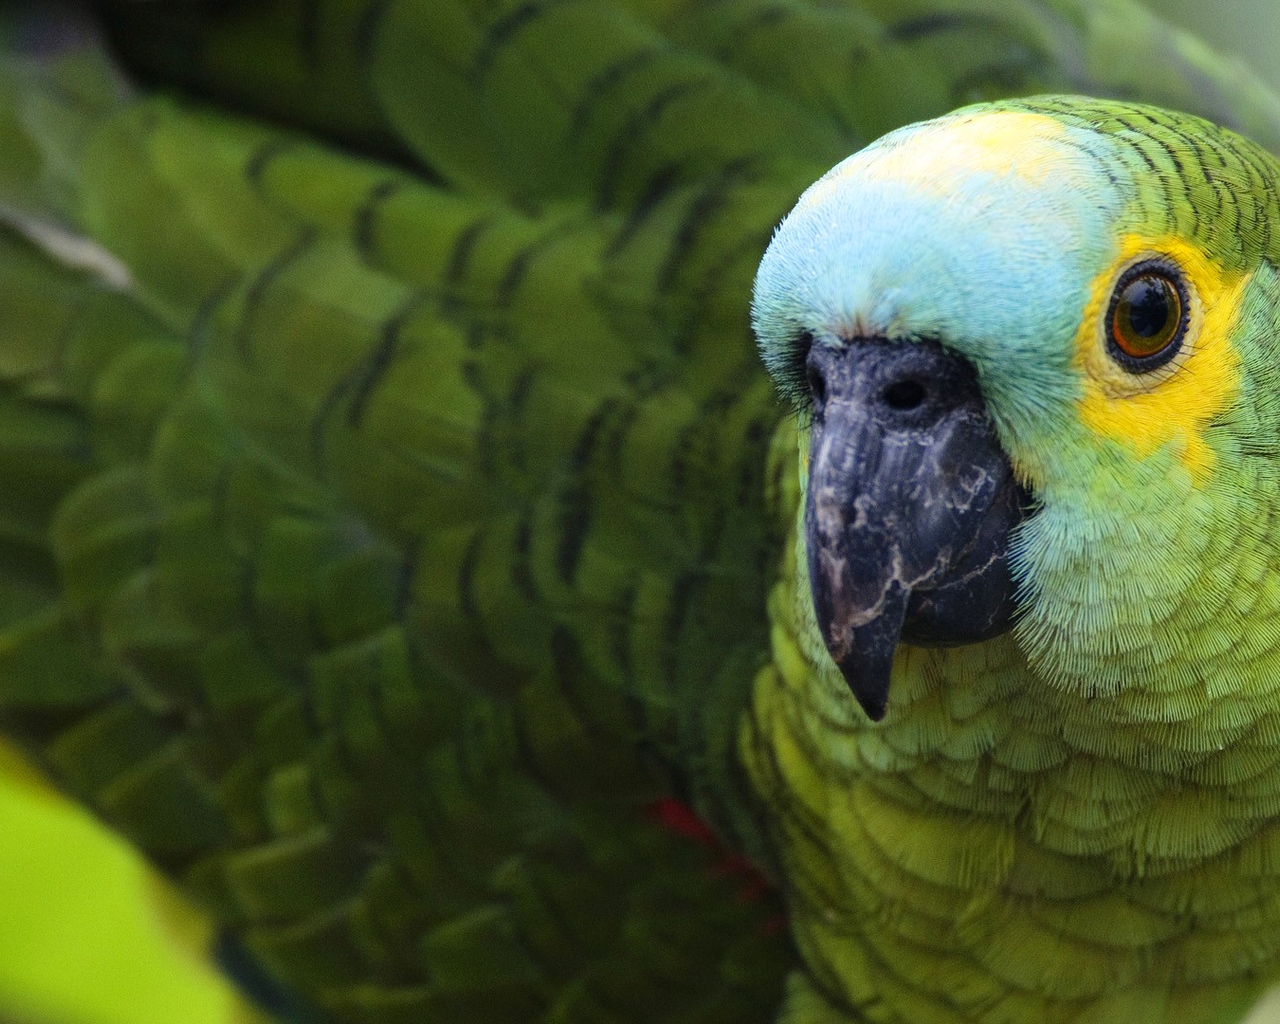 Image: Parrot, green, bird, feathers